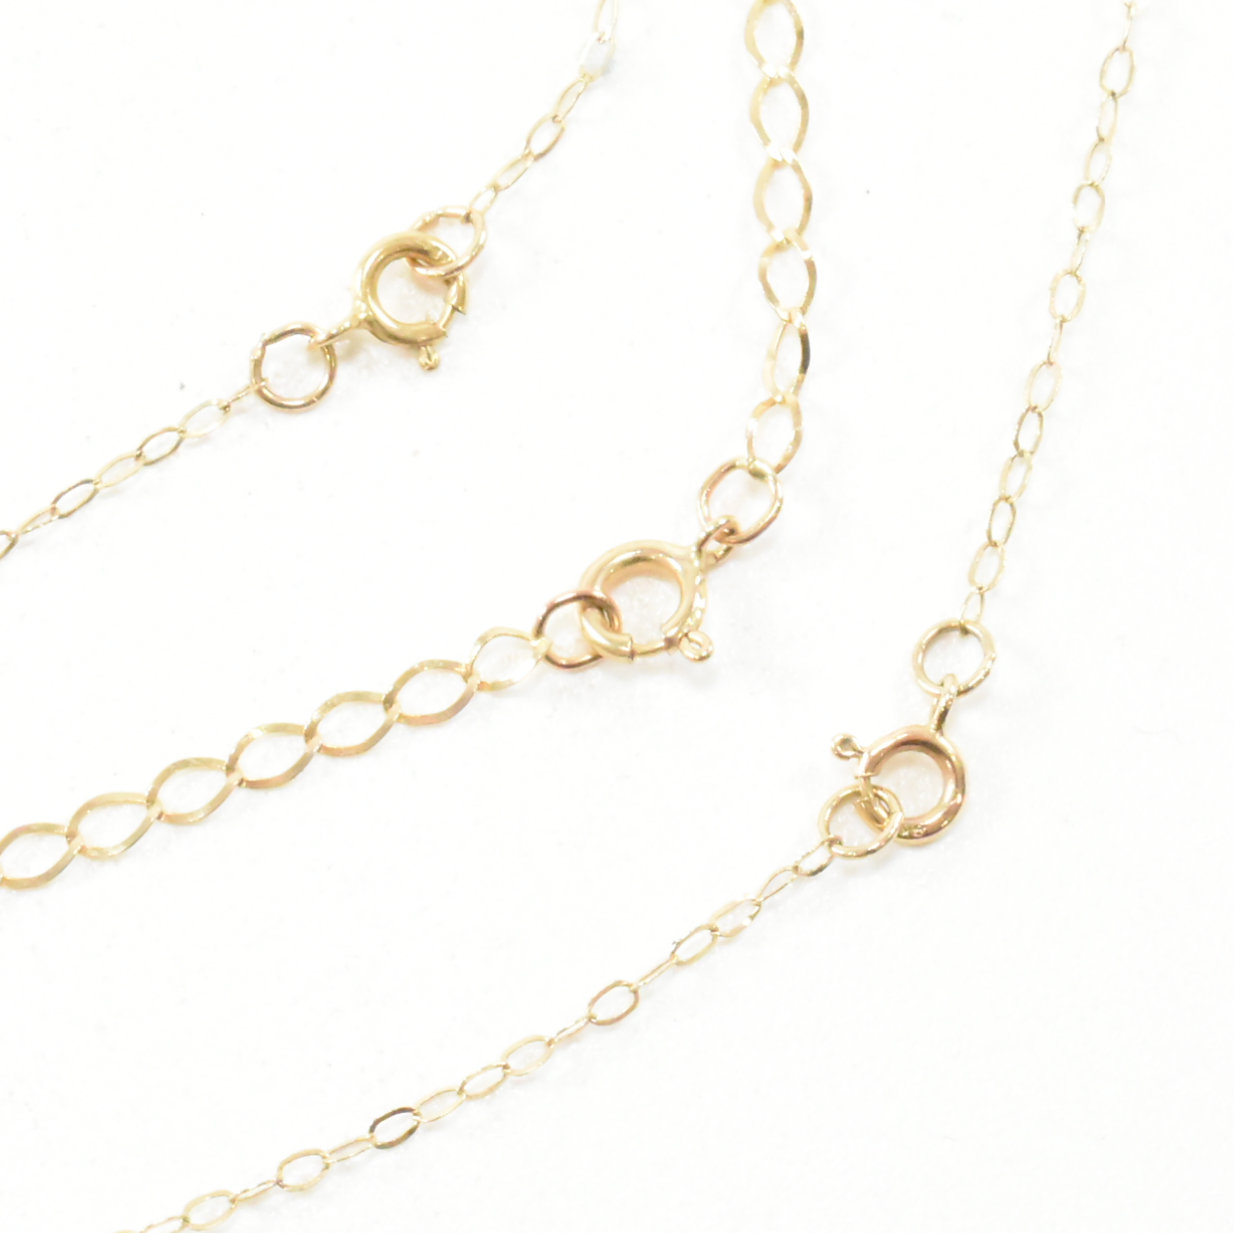 THREE 9CT GOLD CHAIN NECKLACES - Image 4 of 4